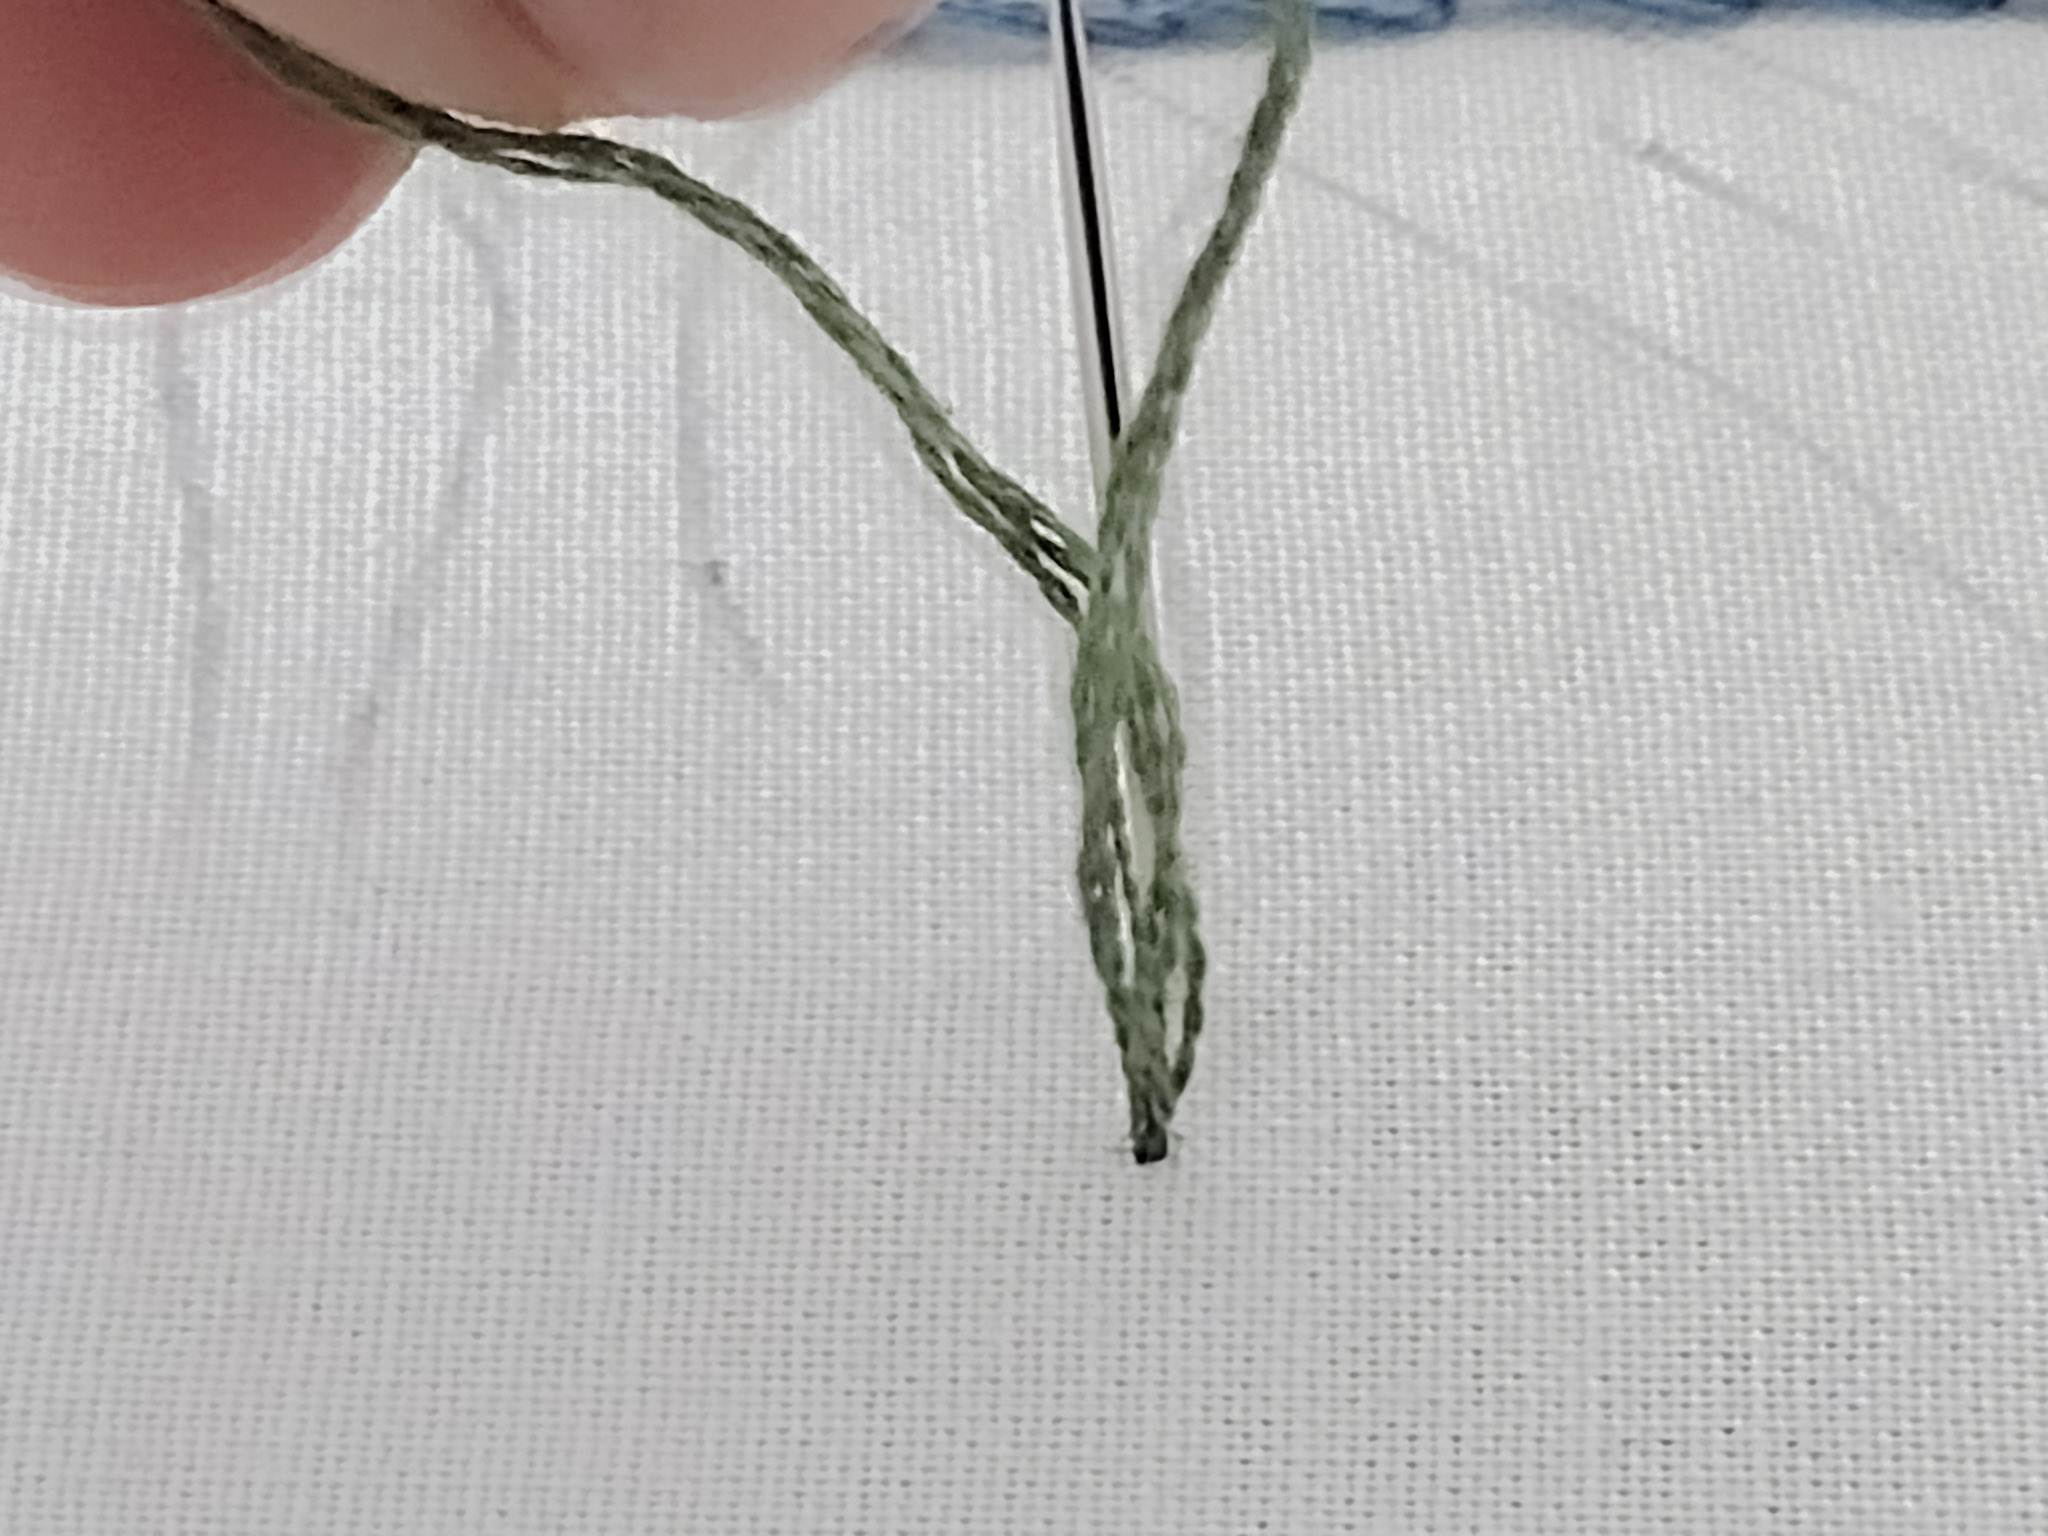 twisting embroidery floss loop in front of a needle